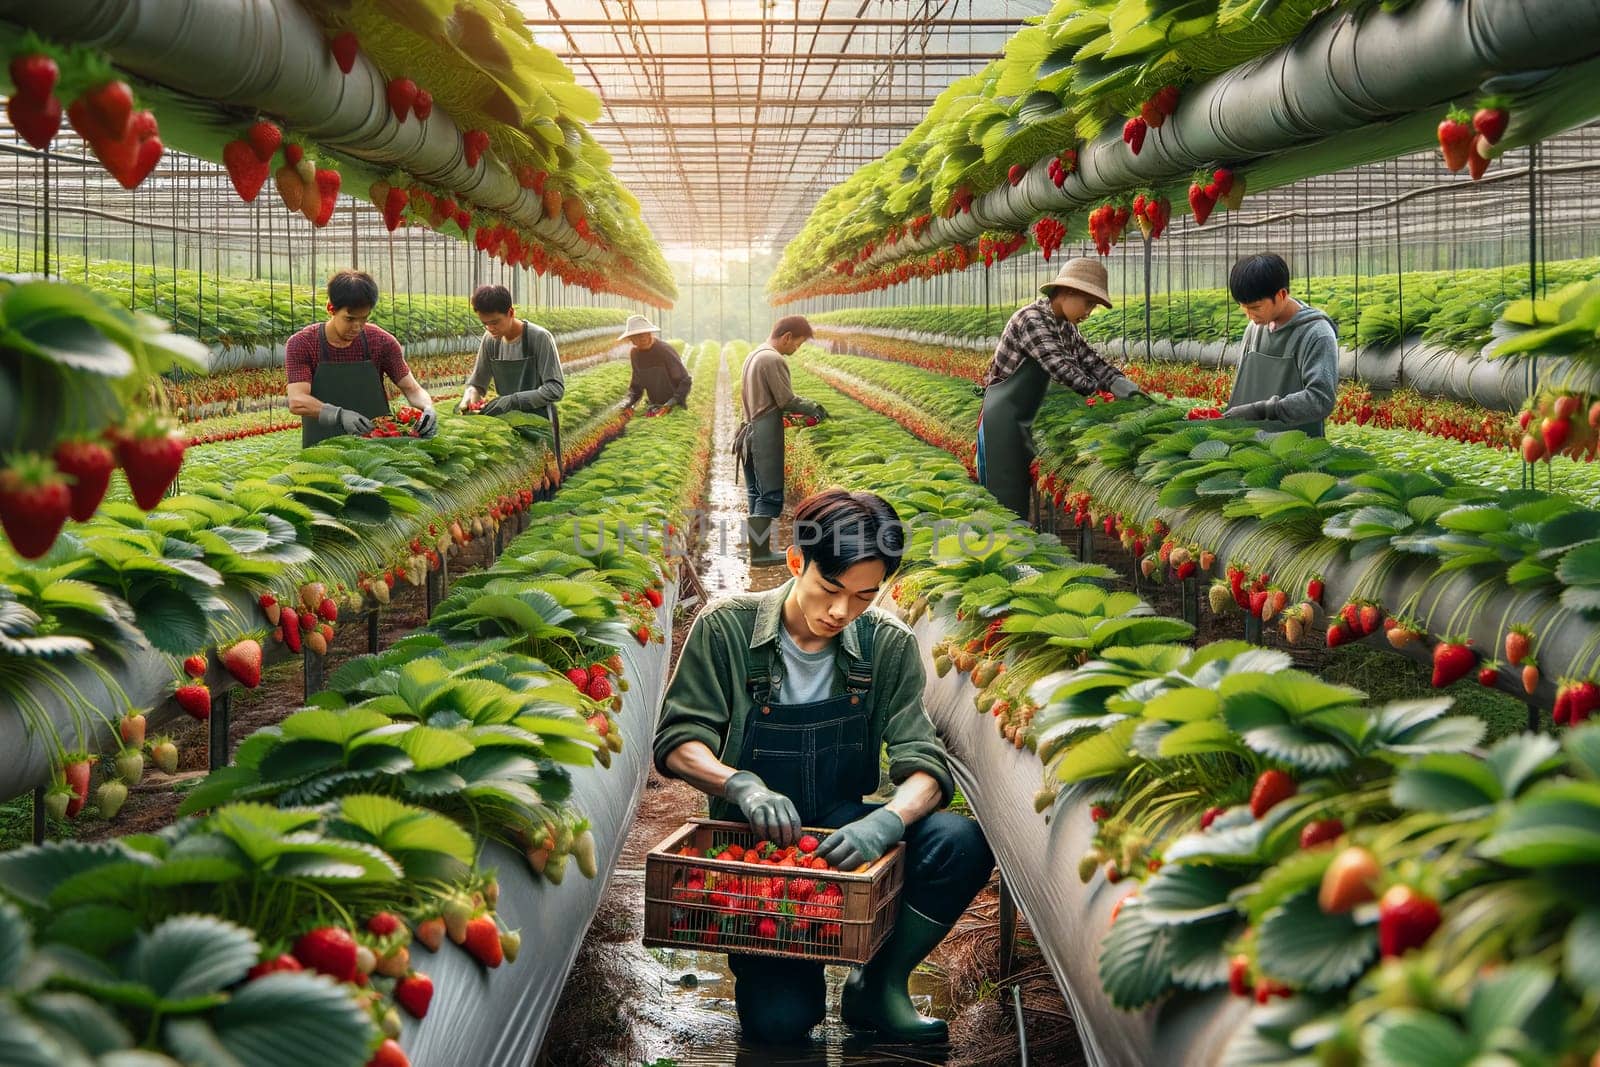 workers harvesting strawberries in a vertical farm greenhouse.